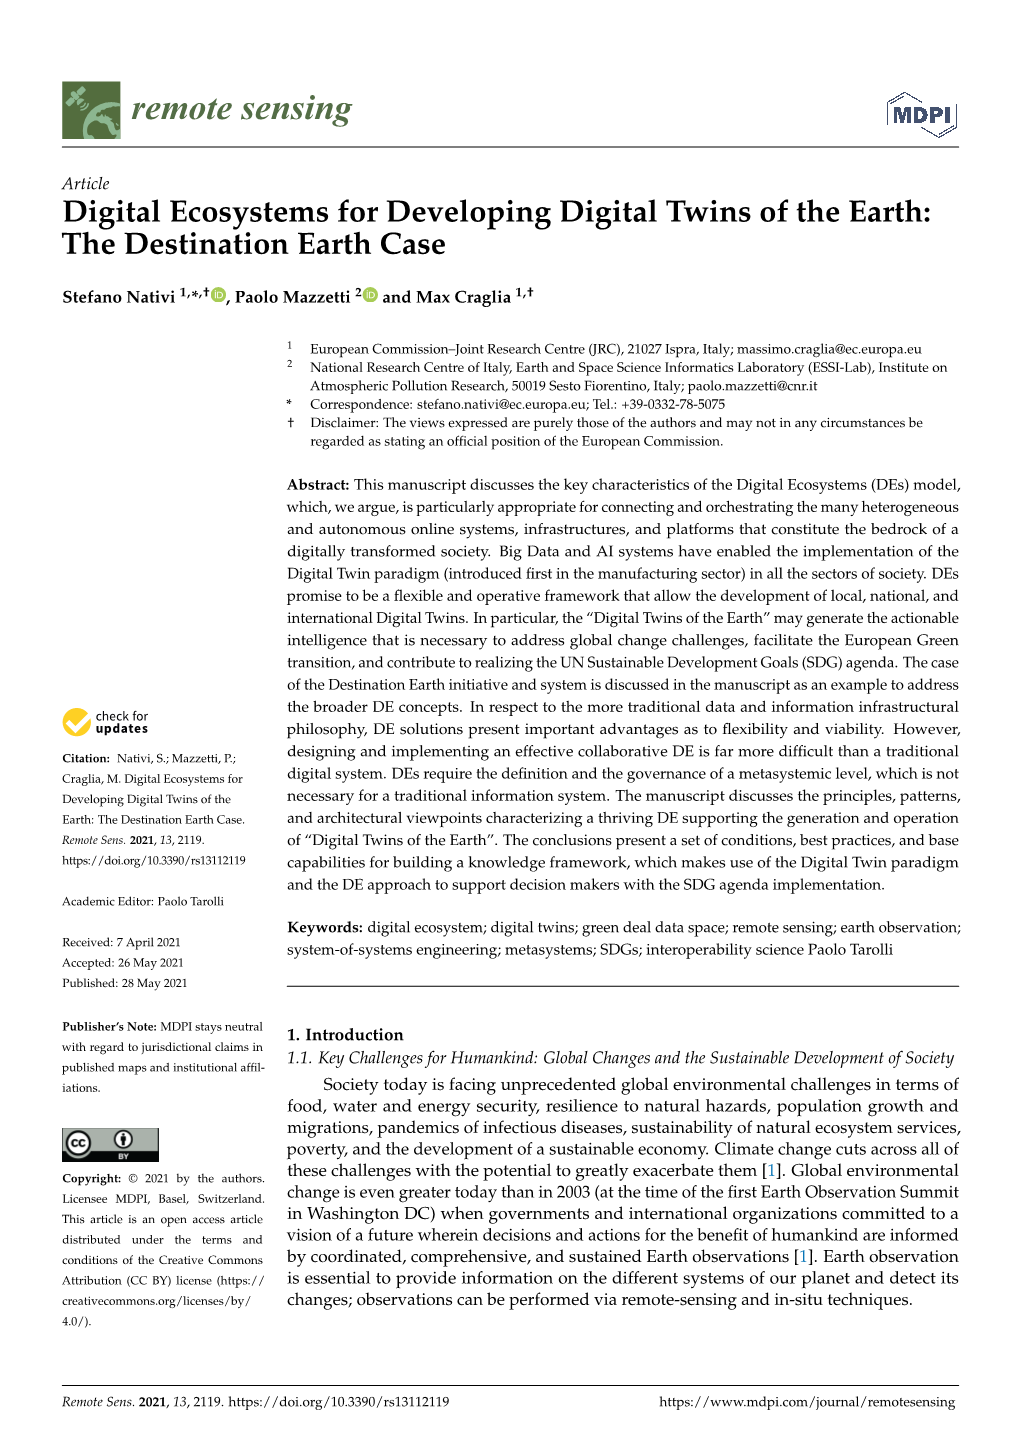 Digital Ecosystems for Developing Digital Twins of the Earth: the Destination Earth Case